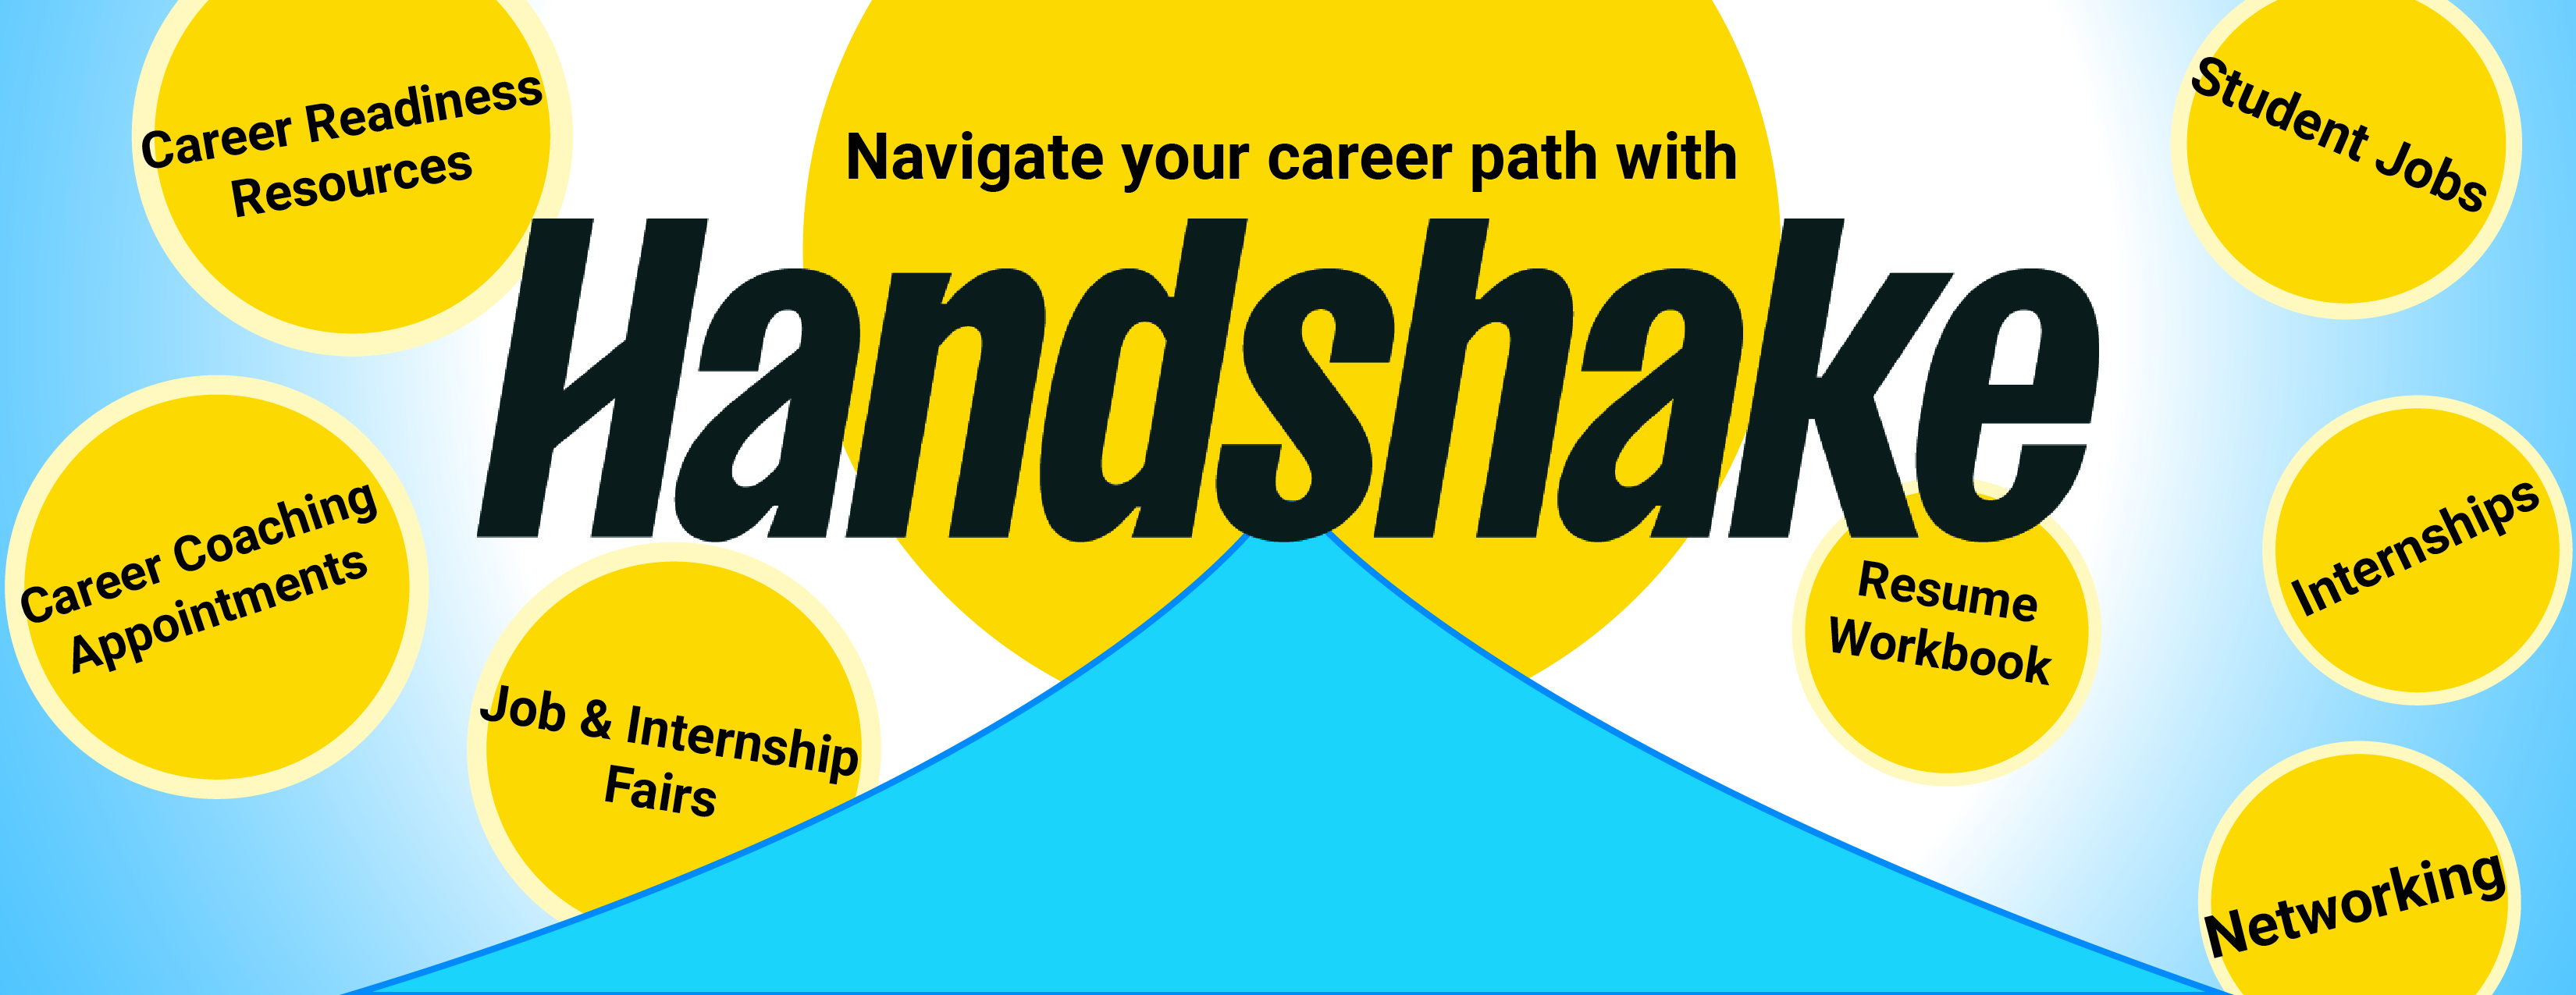 Navigate your career with Handshake. Find Jobs, internships, career fairs, resources, coaching appointments and more. Click here to log in.